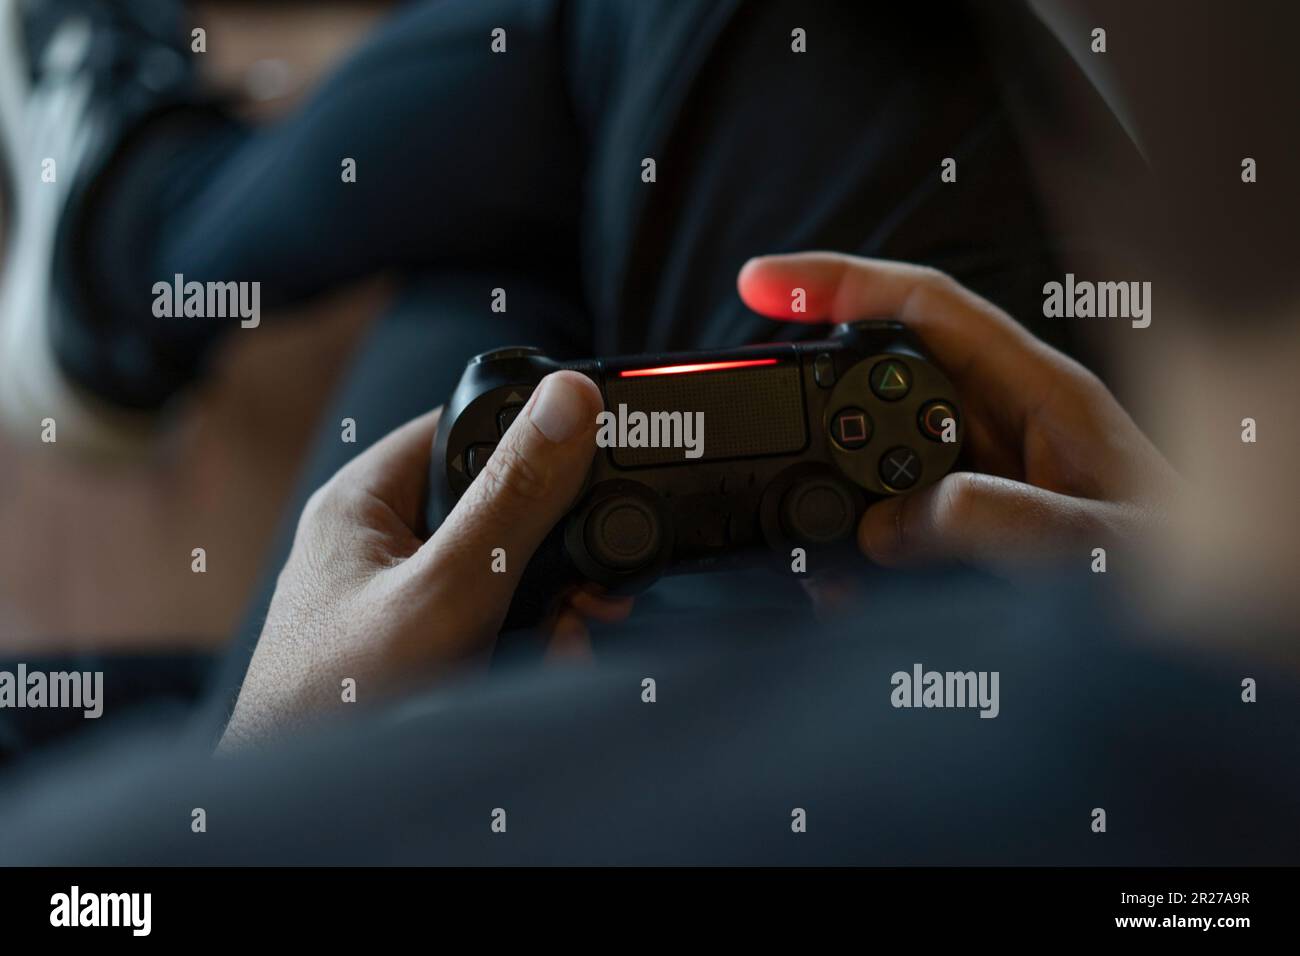 Close-up of an adult man's hands holding a joystick while playing a video game on a console. Stock Photo